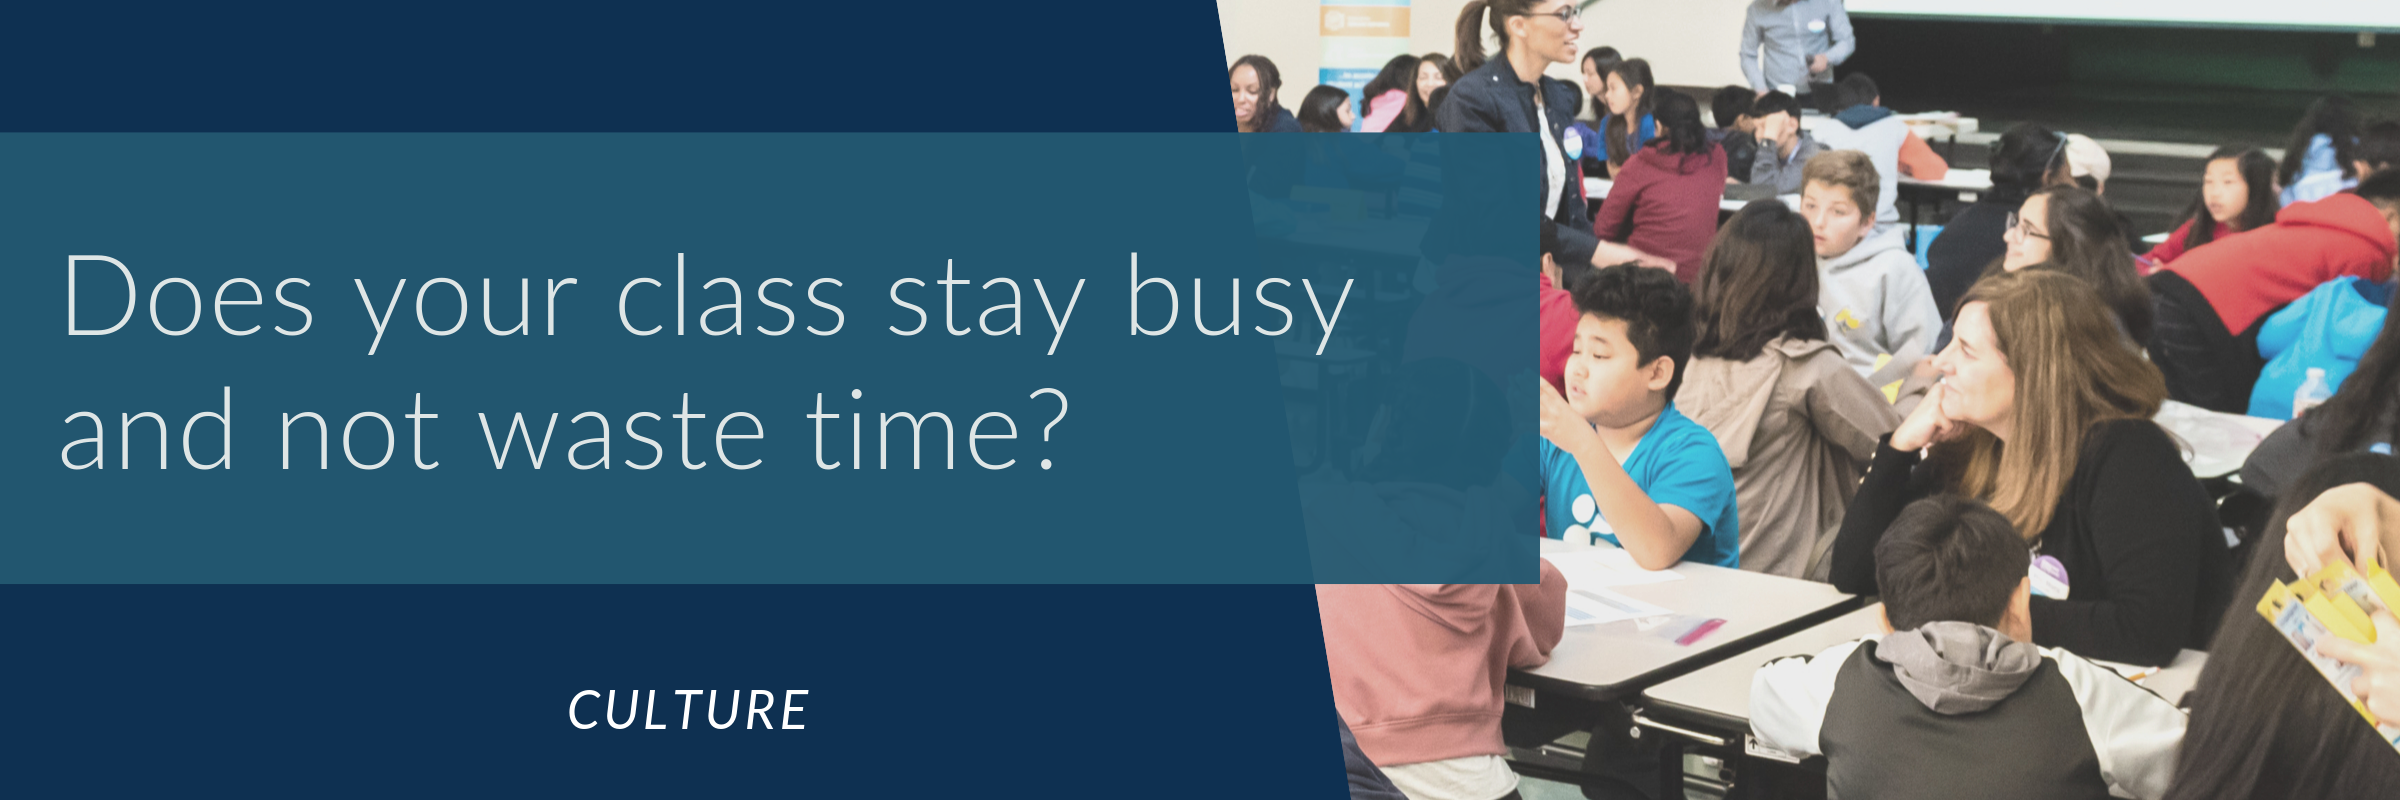 Does your class stay busy and not waste time?